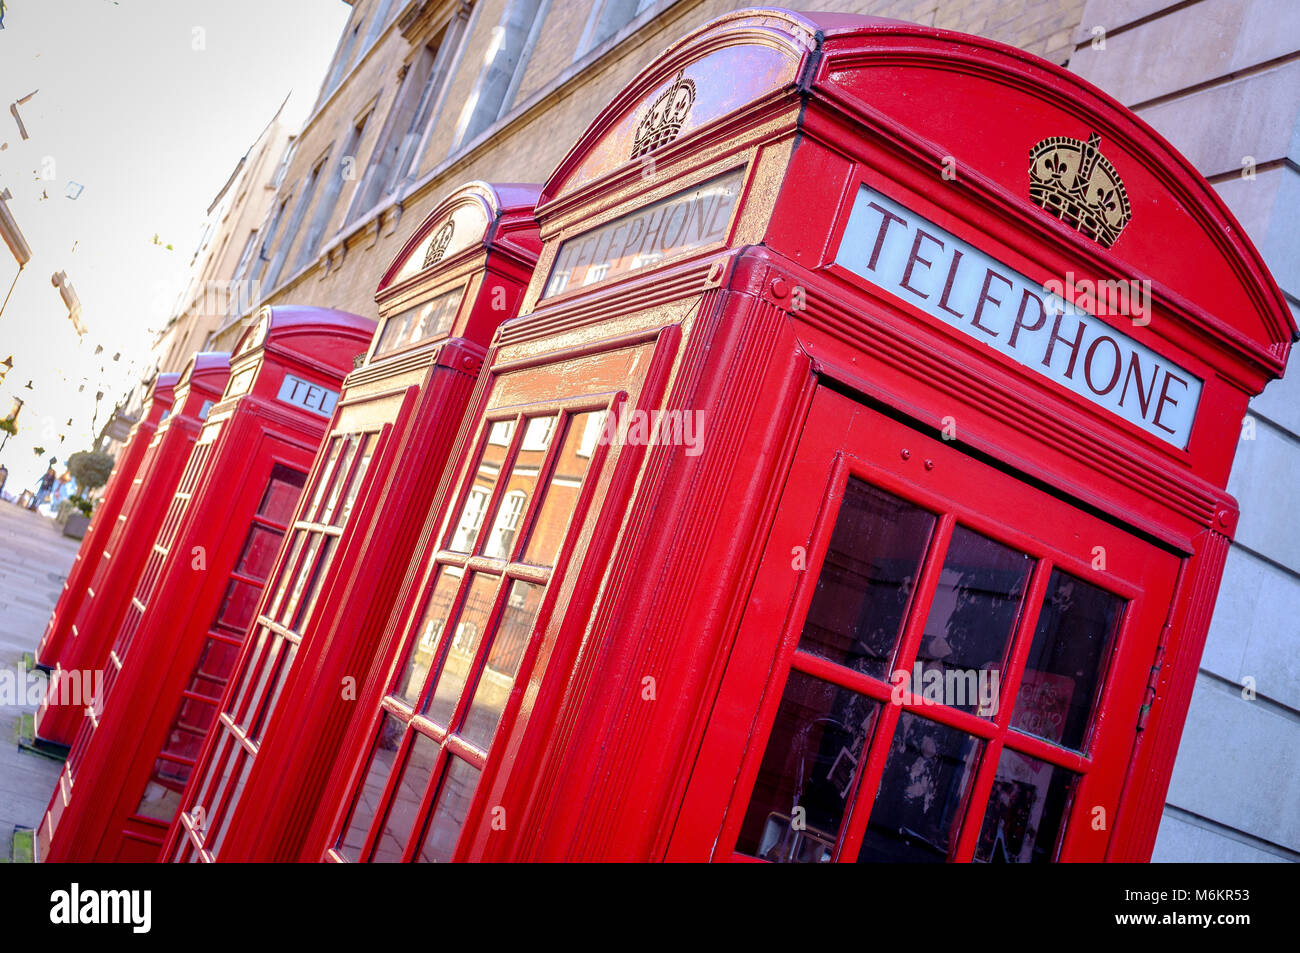 A row of 5 iconic British red telephone boxes in a London Street Stock Photo